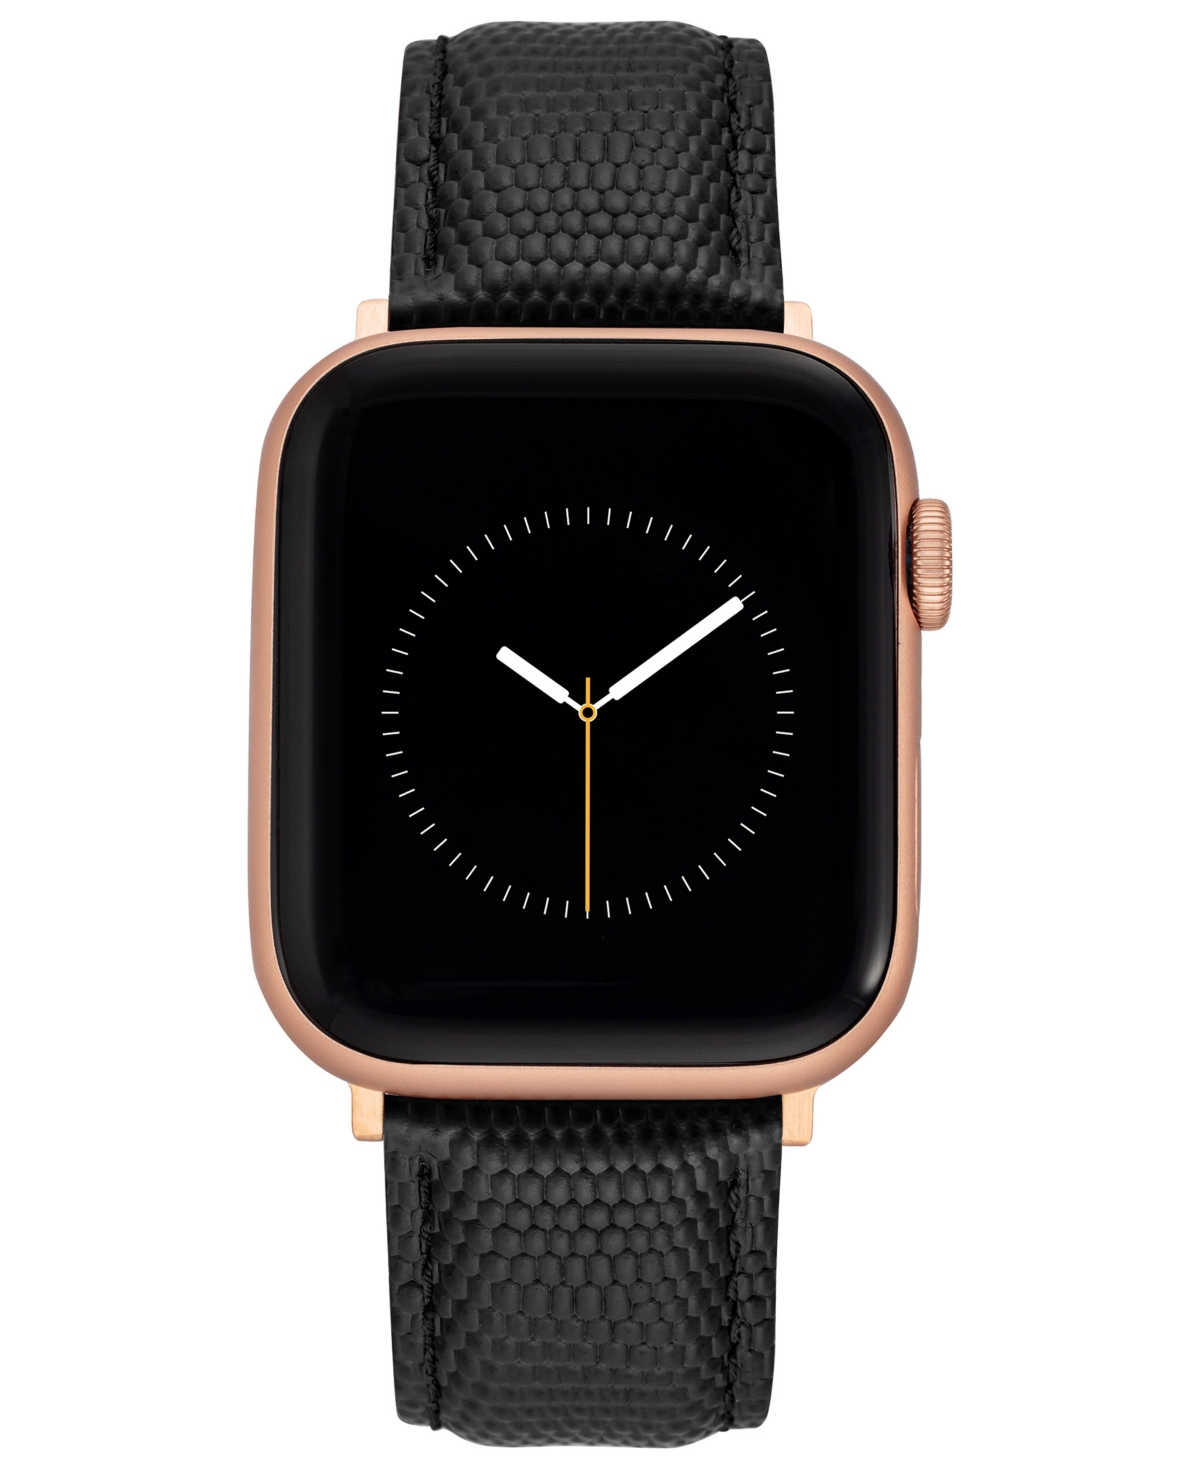 WITHIT BLACK LIZARD GRAIN TEXTURED GENUINE LEATHER BAND COMPATIBLE WITH 38/40/41MM APPLE WATCH